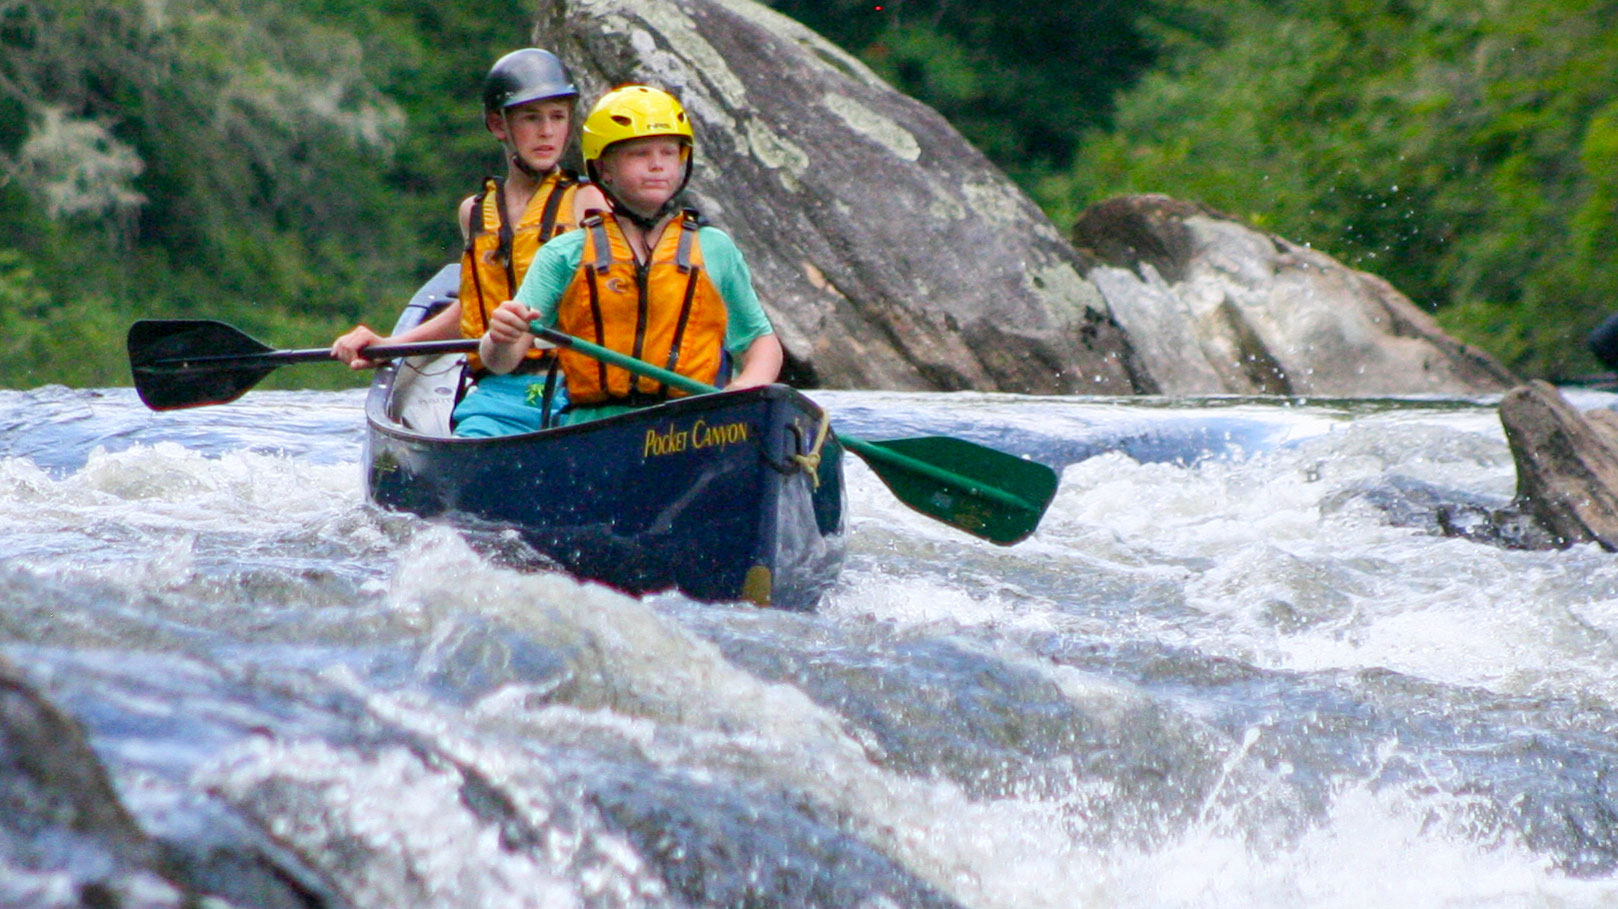 Boys Camp Whitewater Canoeing